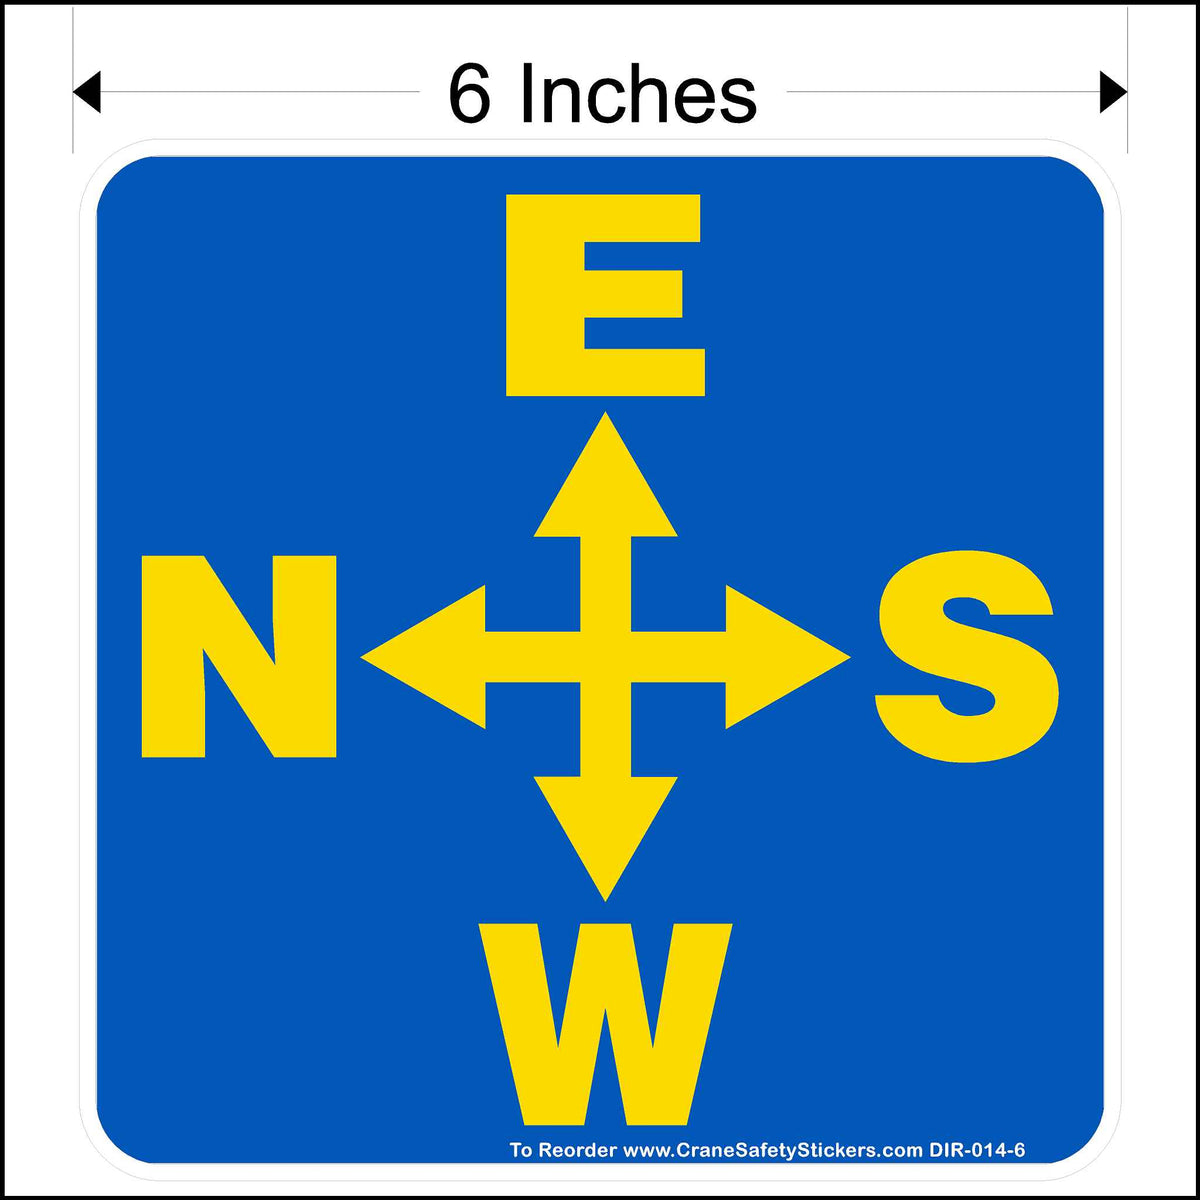 6 Inch overhead crane directional decal. Printed with yellow East, South, West, and North Arrows on a blue background.